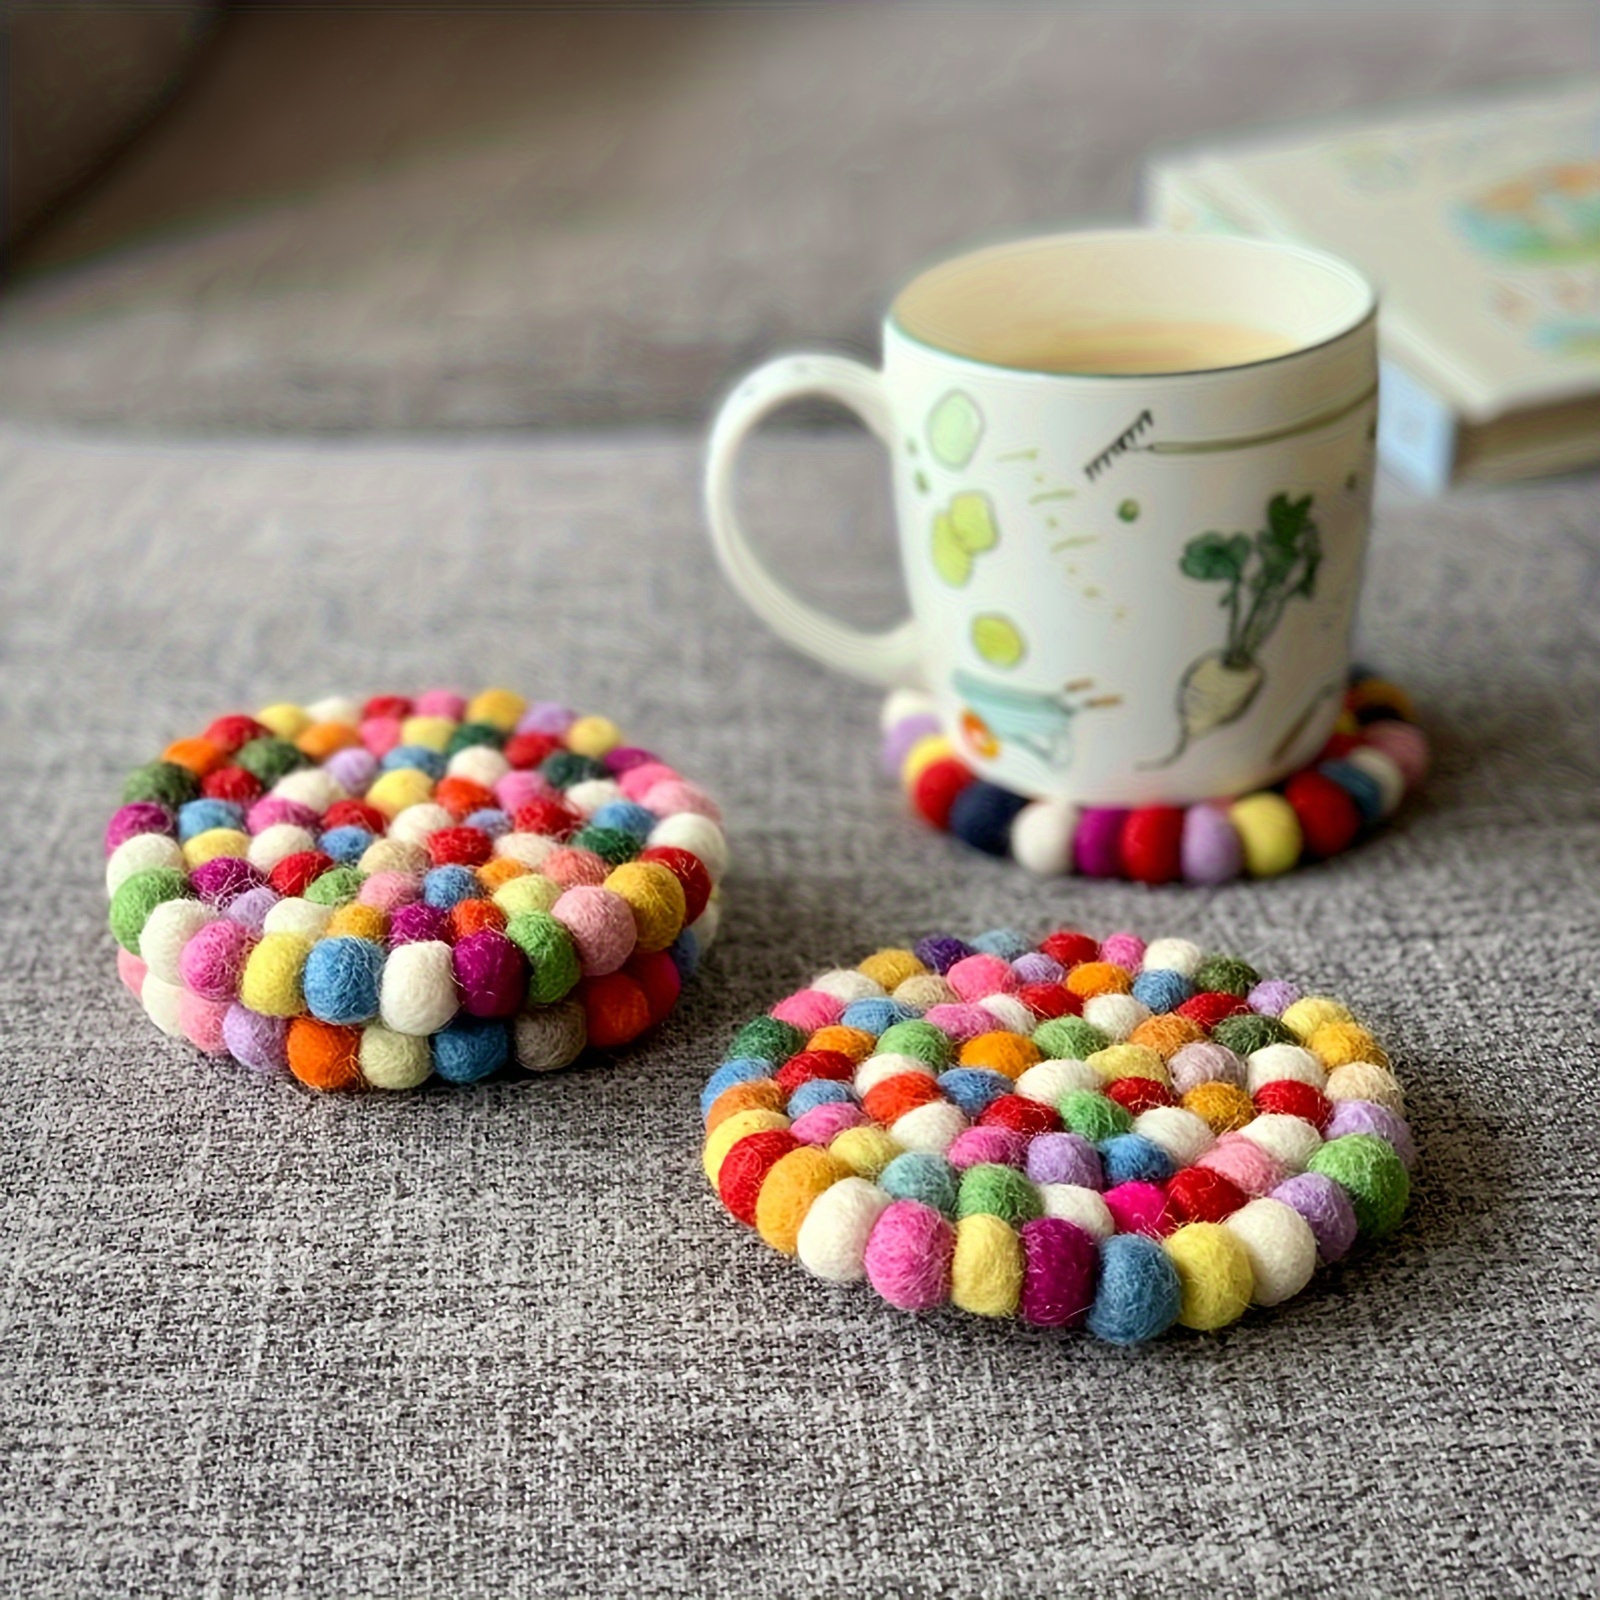 

Colorful Wool Felt Coaster - Heat-resistant, Rainbow-themed Drink Mat For Tea & Coffee Cups - Perfect Gift For Her